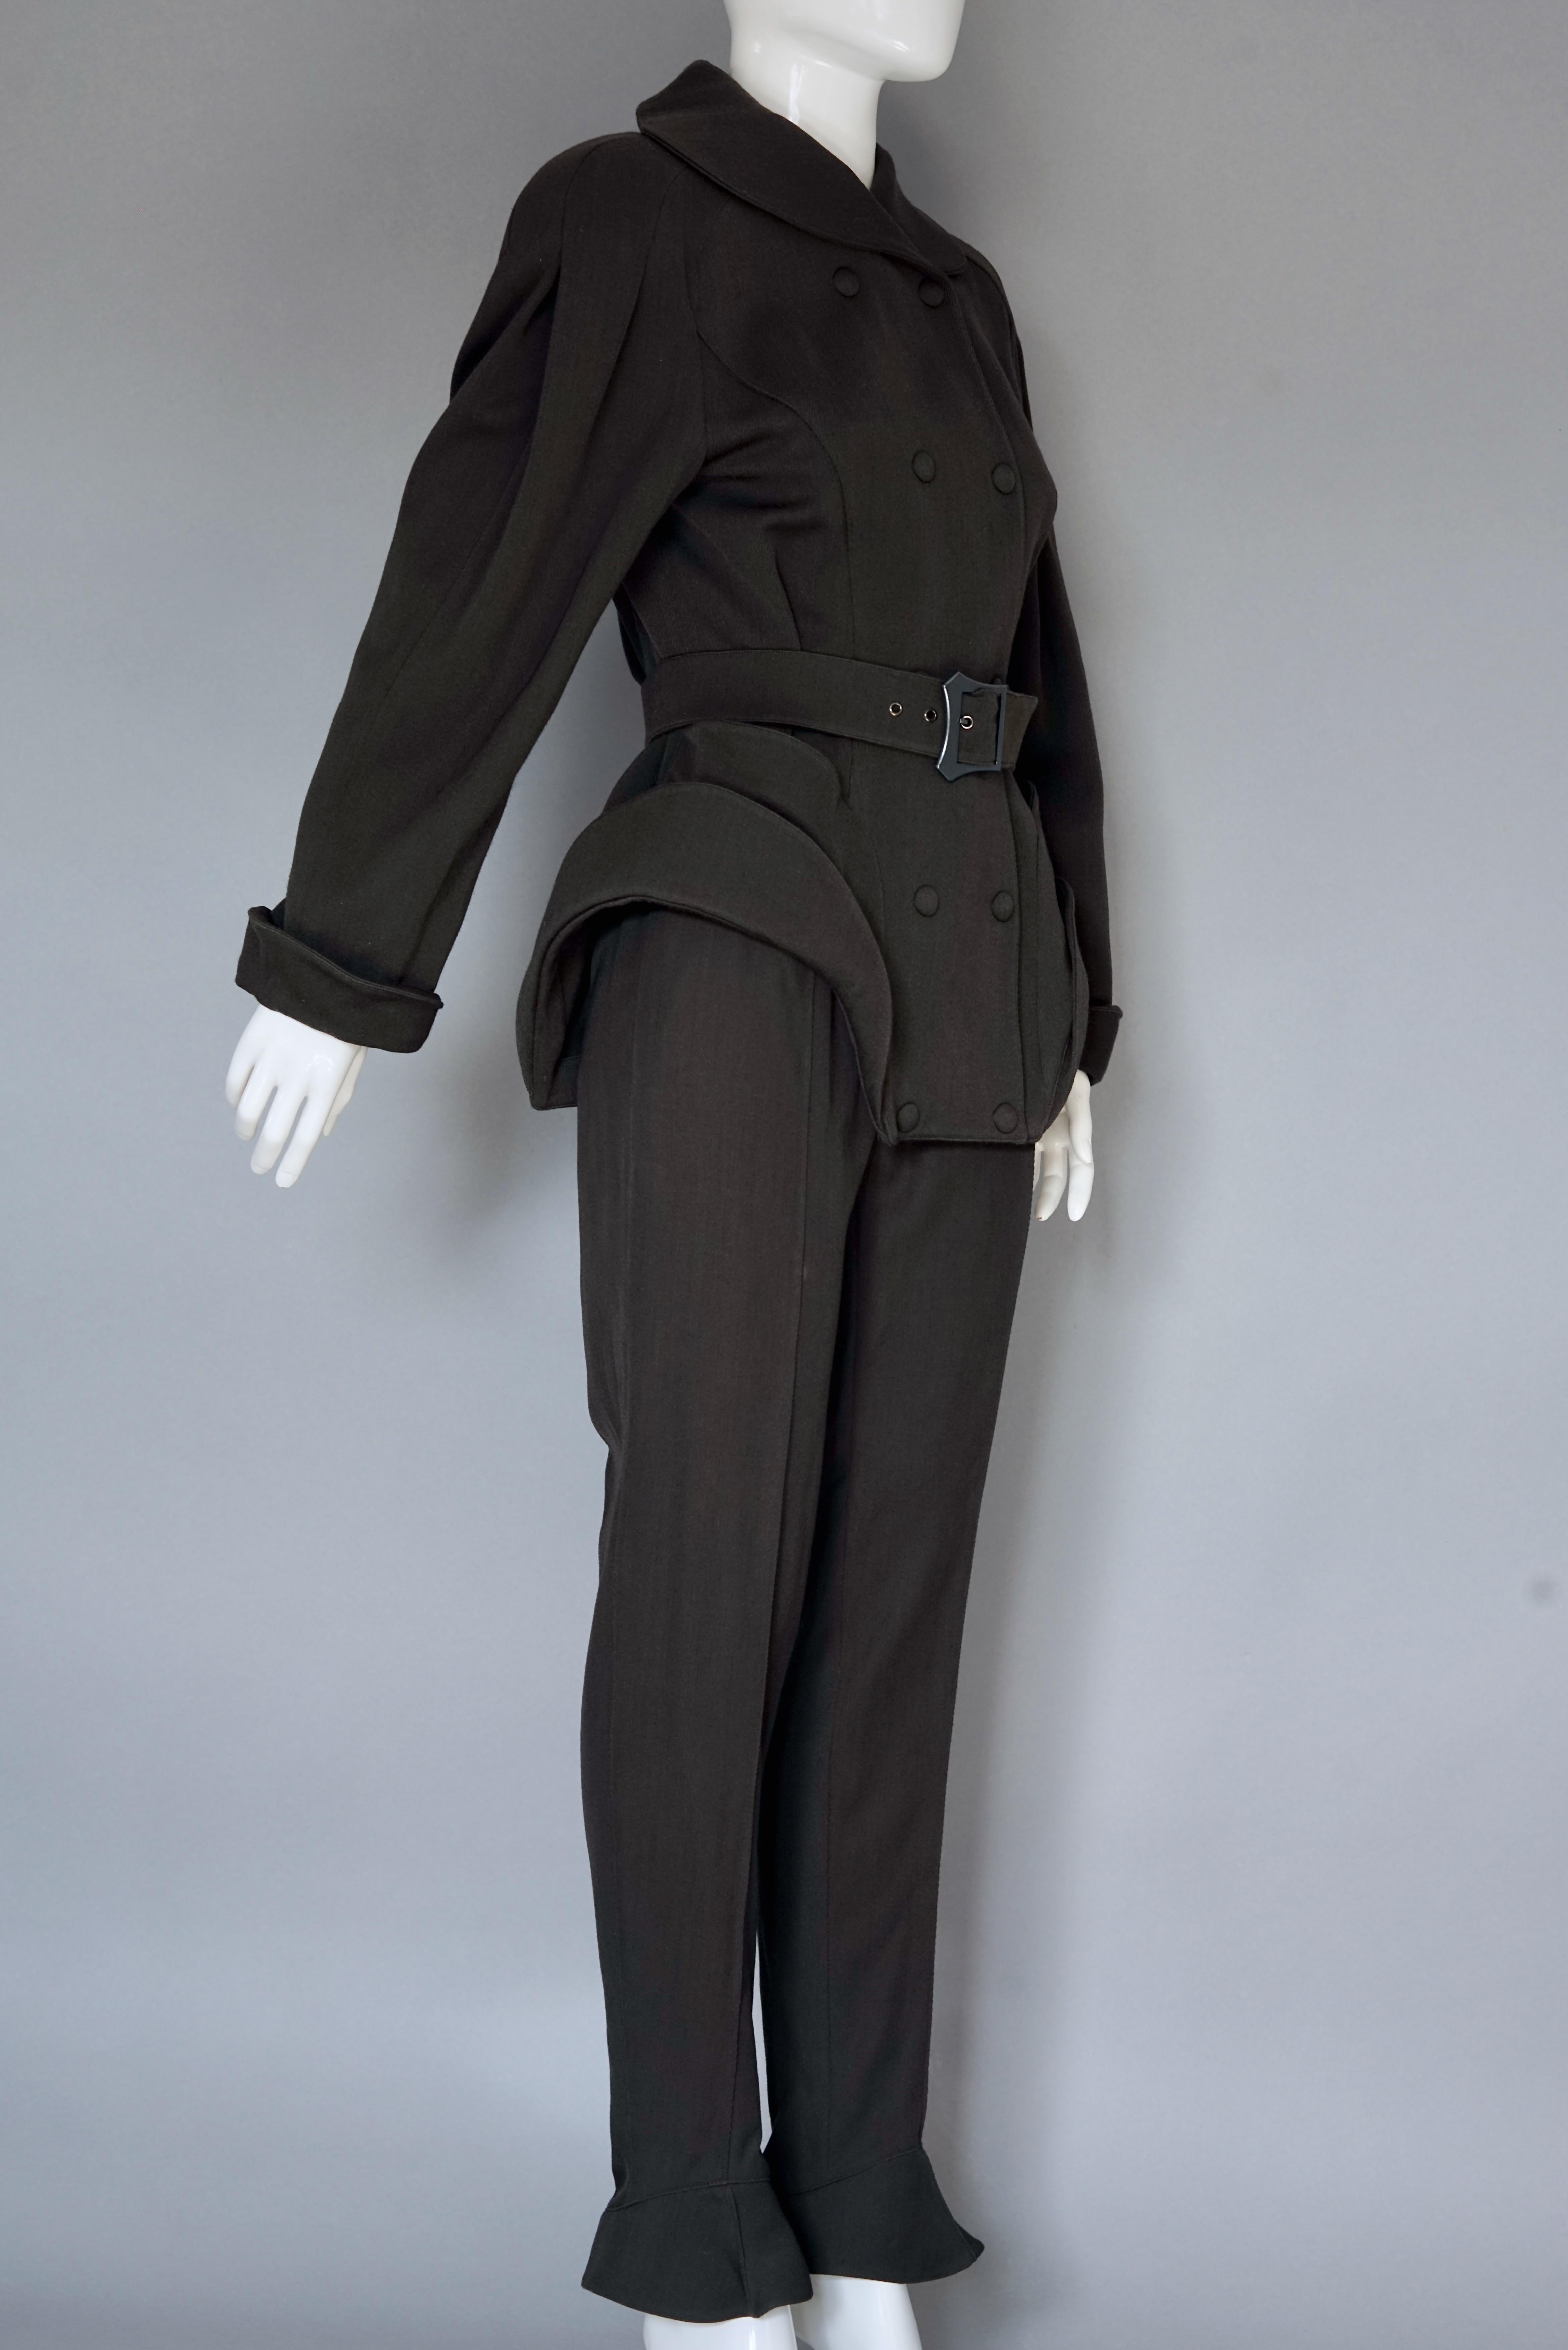 Women's Vintage RARE THIERRY MUGLER Space Age Sculptural Belted Jacket Trouser Suit